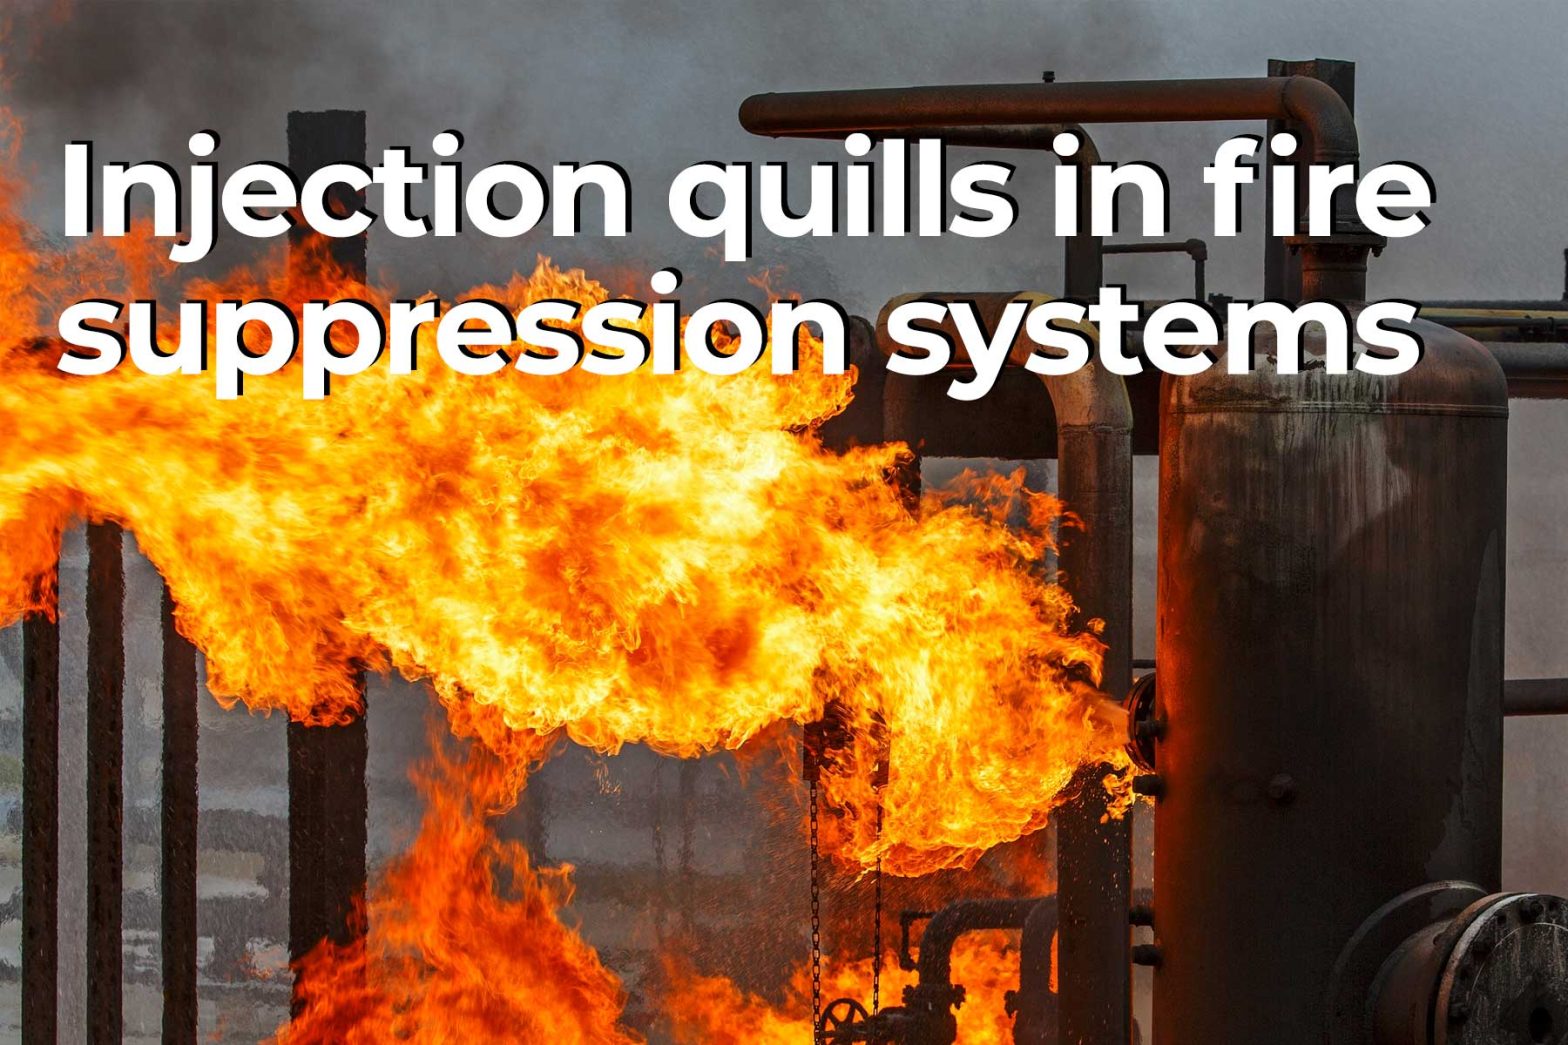 Purpose of using injection quills in fire suppression systems